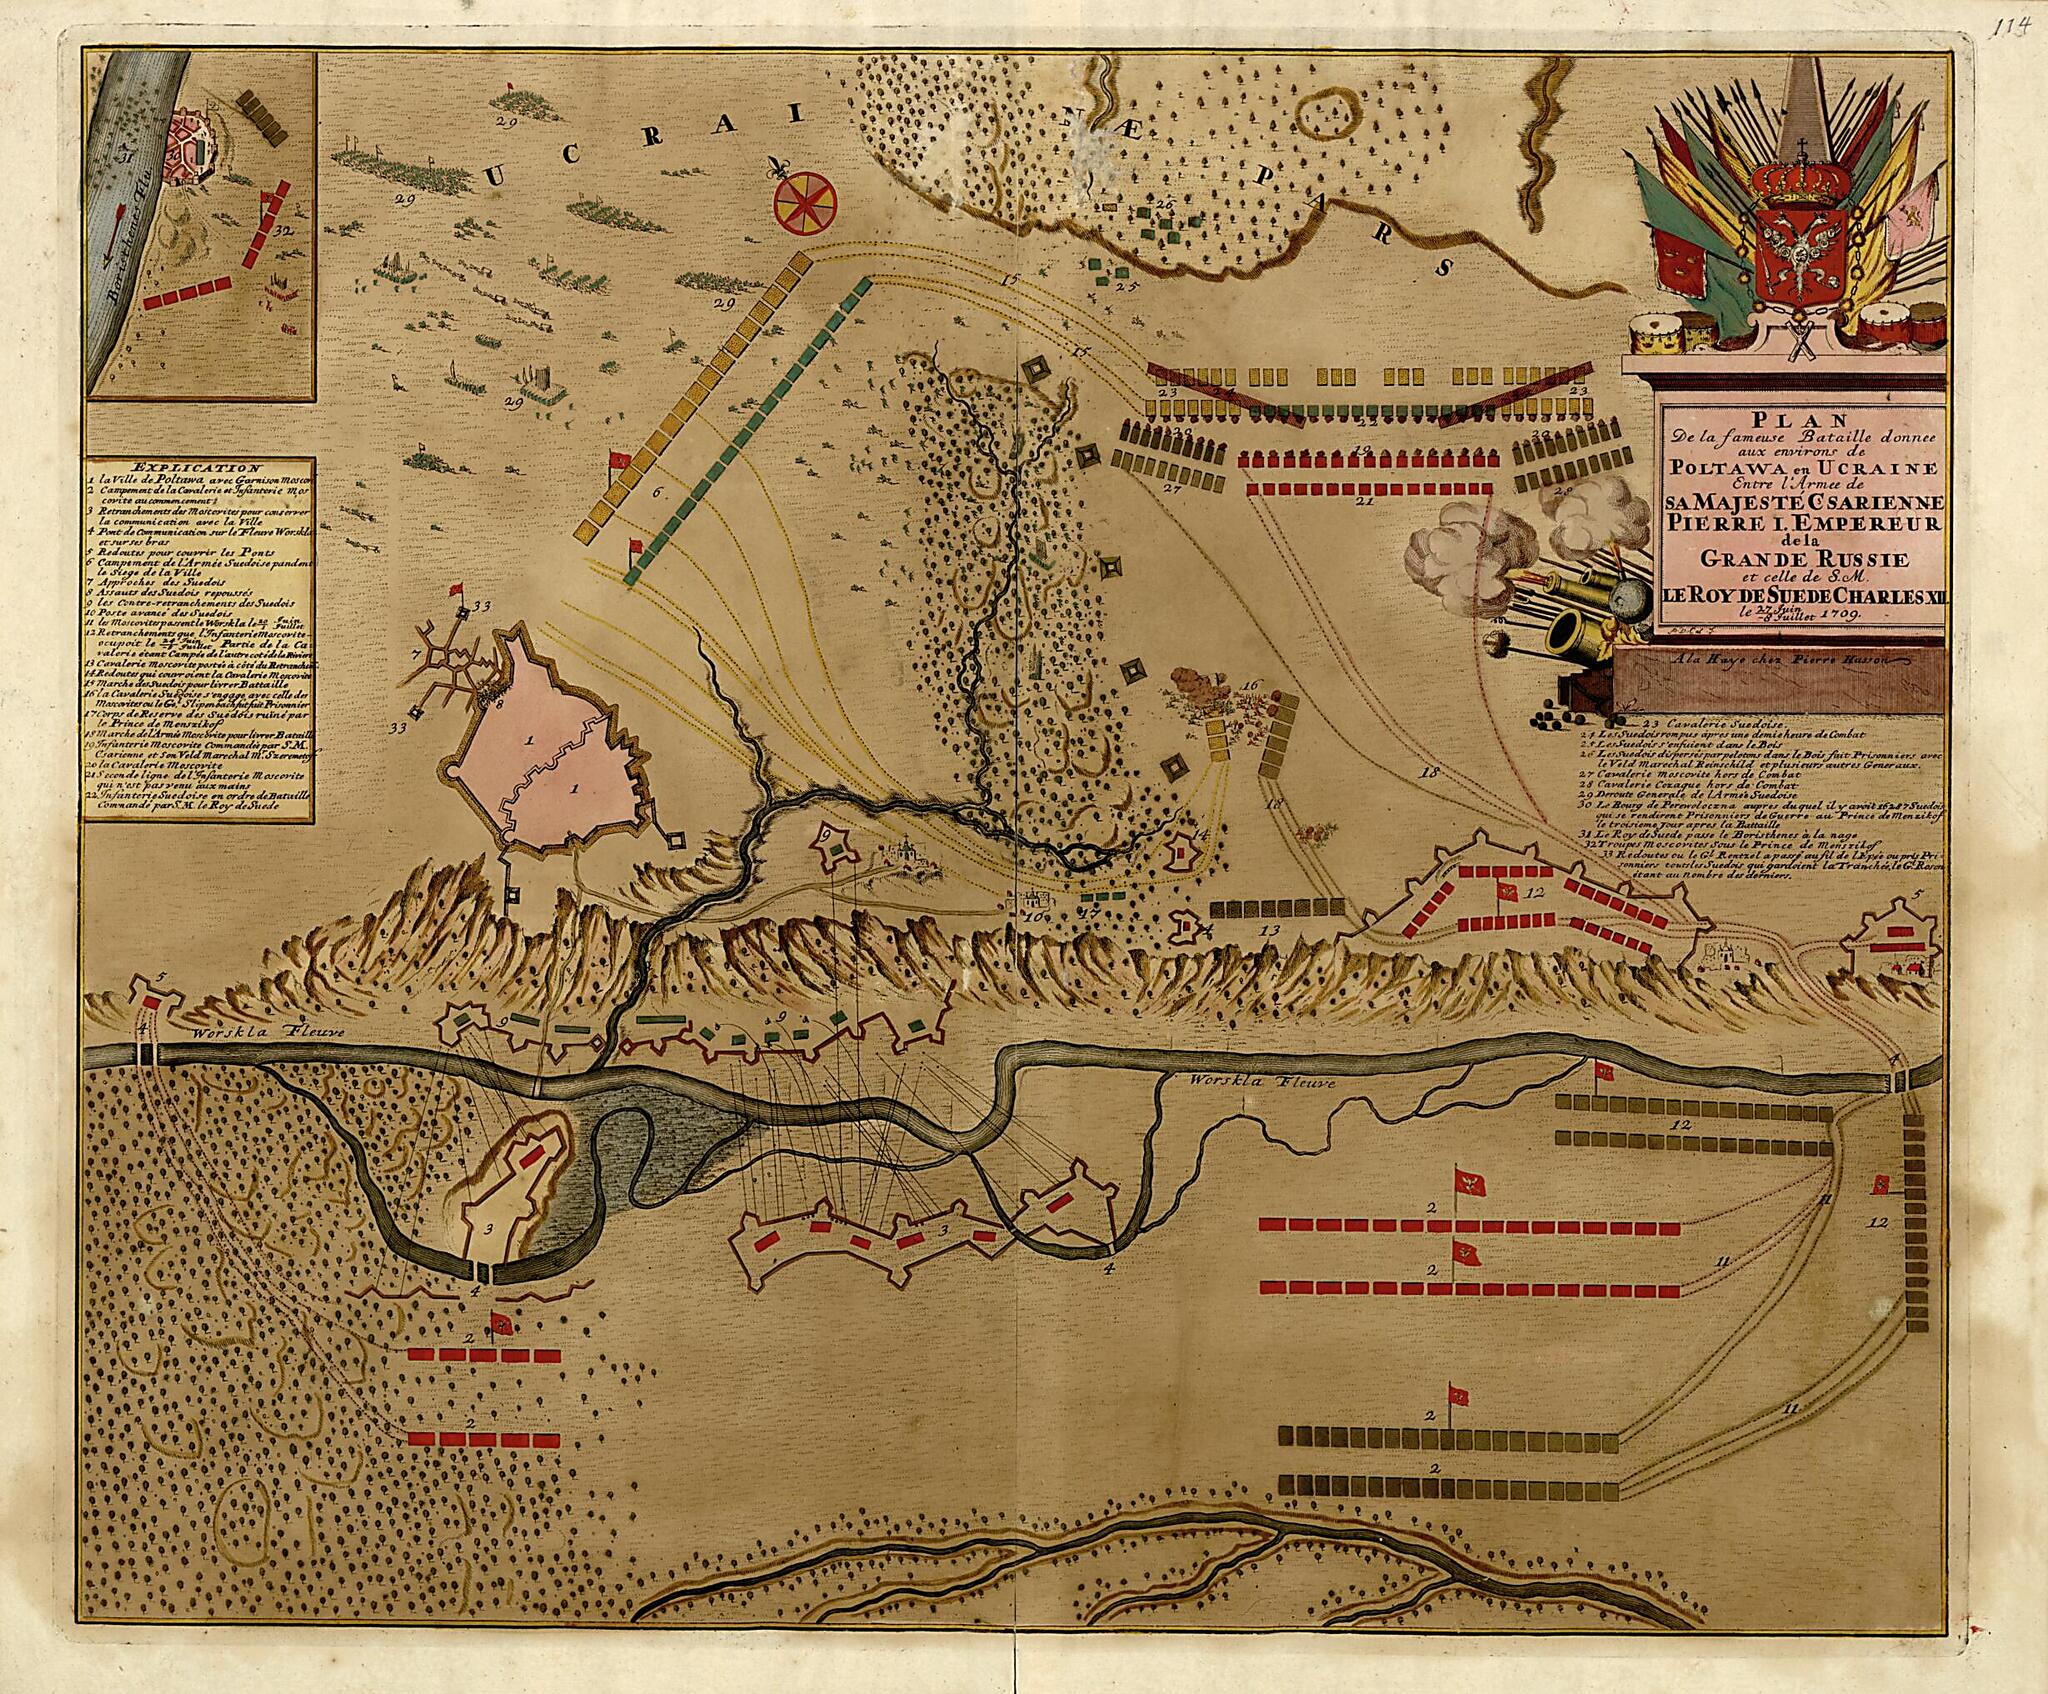 This old map of Plan De La Fameuse Bataille Donnee Aux Environs De Poltawa En Urcaine from a Collection of Plans of Fortifications and Battles, 1684-from 1709 from 1709 was created by Anna Beeck in 1709